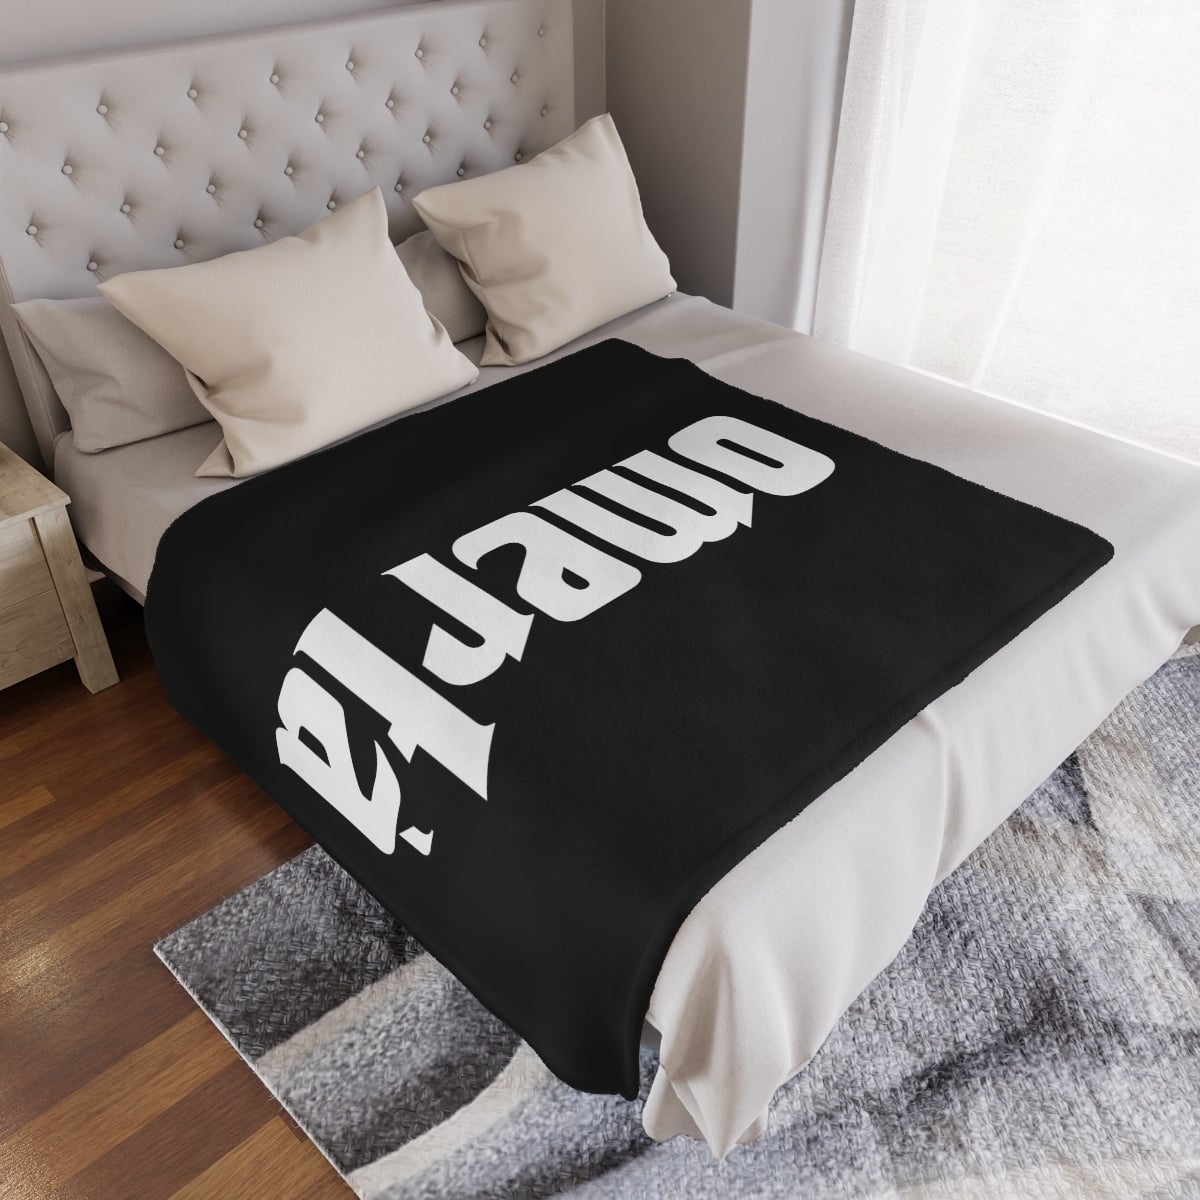 Omerta Mobster Minky Blanket - Stylish Code of Silence for Your Home